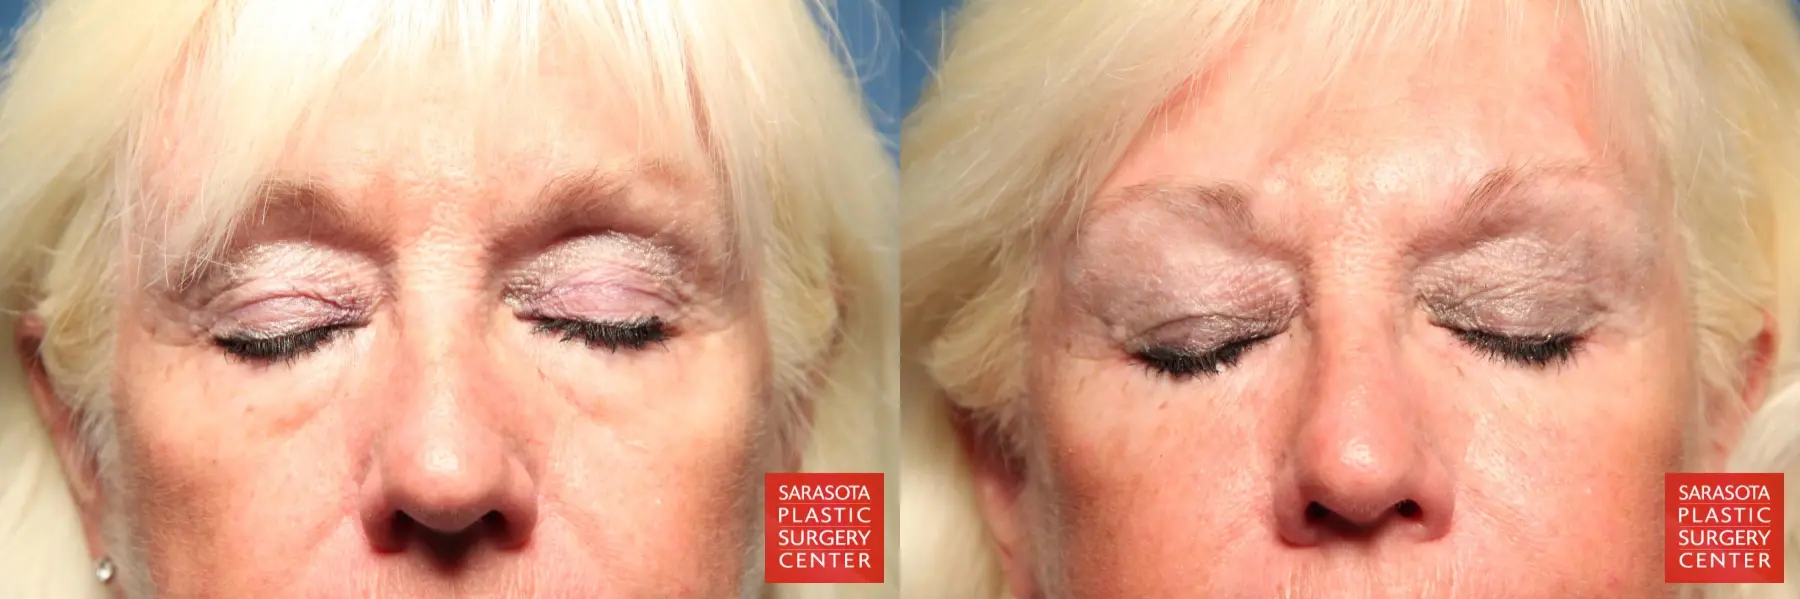 Eyelid Surgery: Patient 1 - Before and After 2